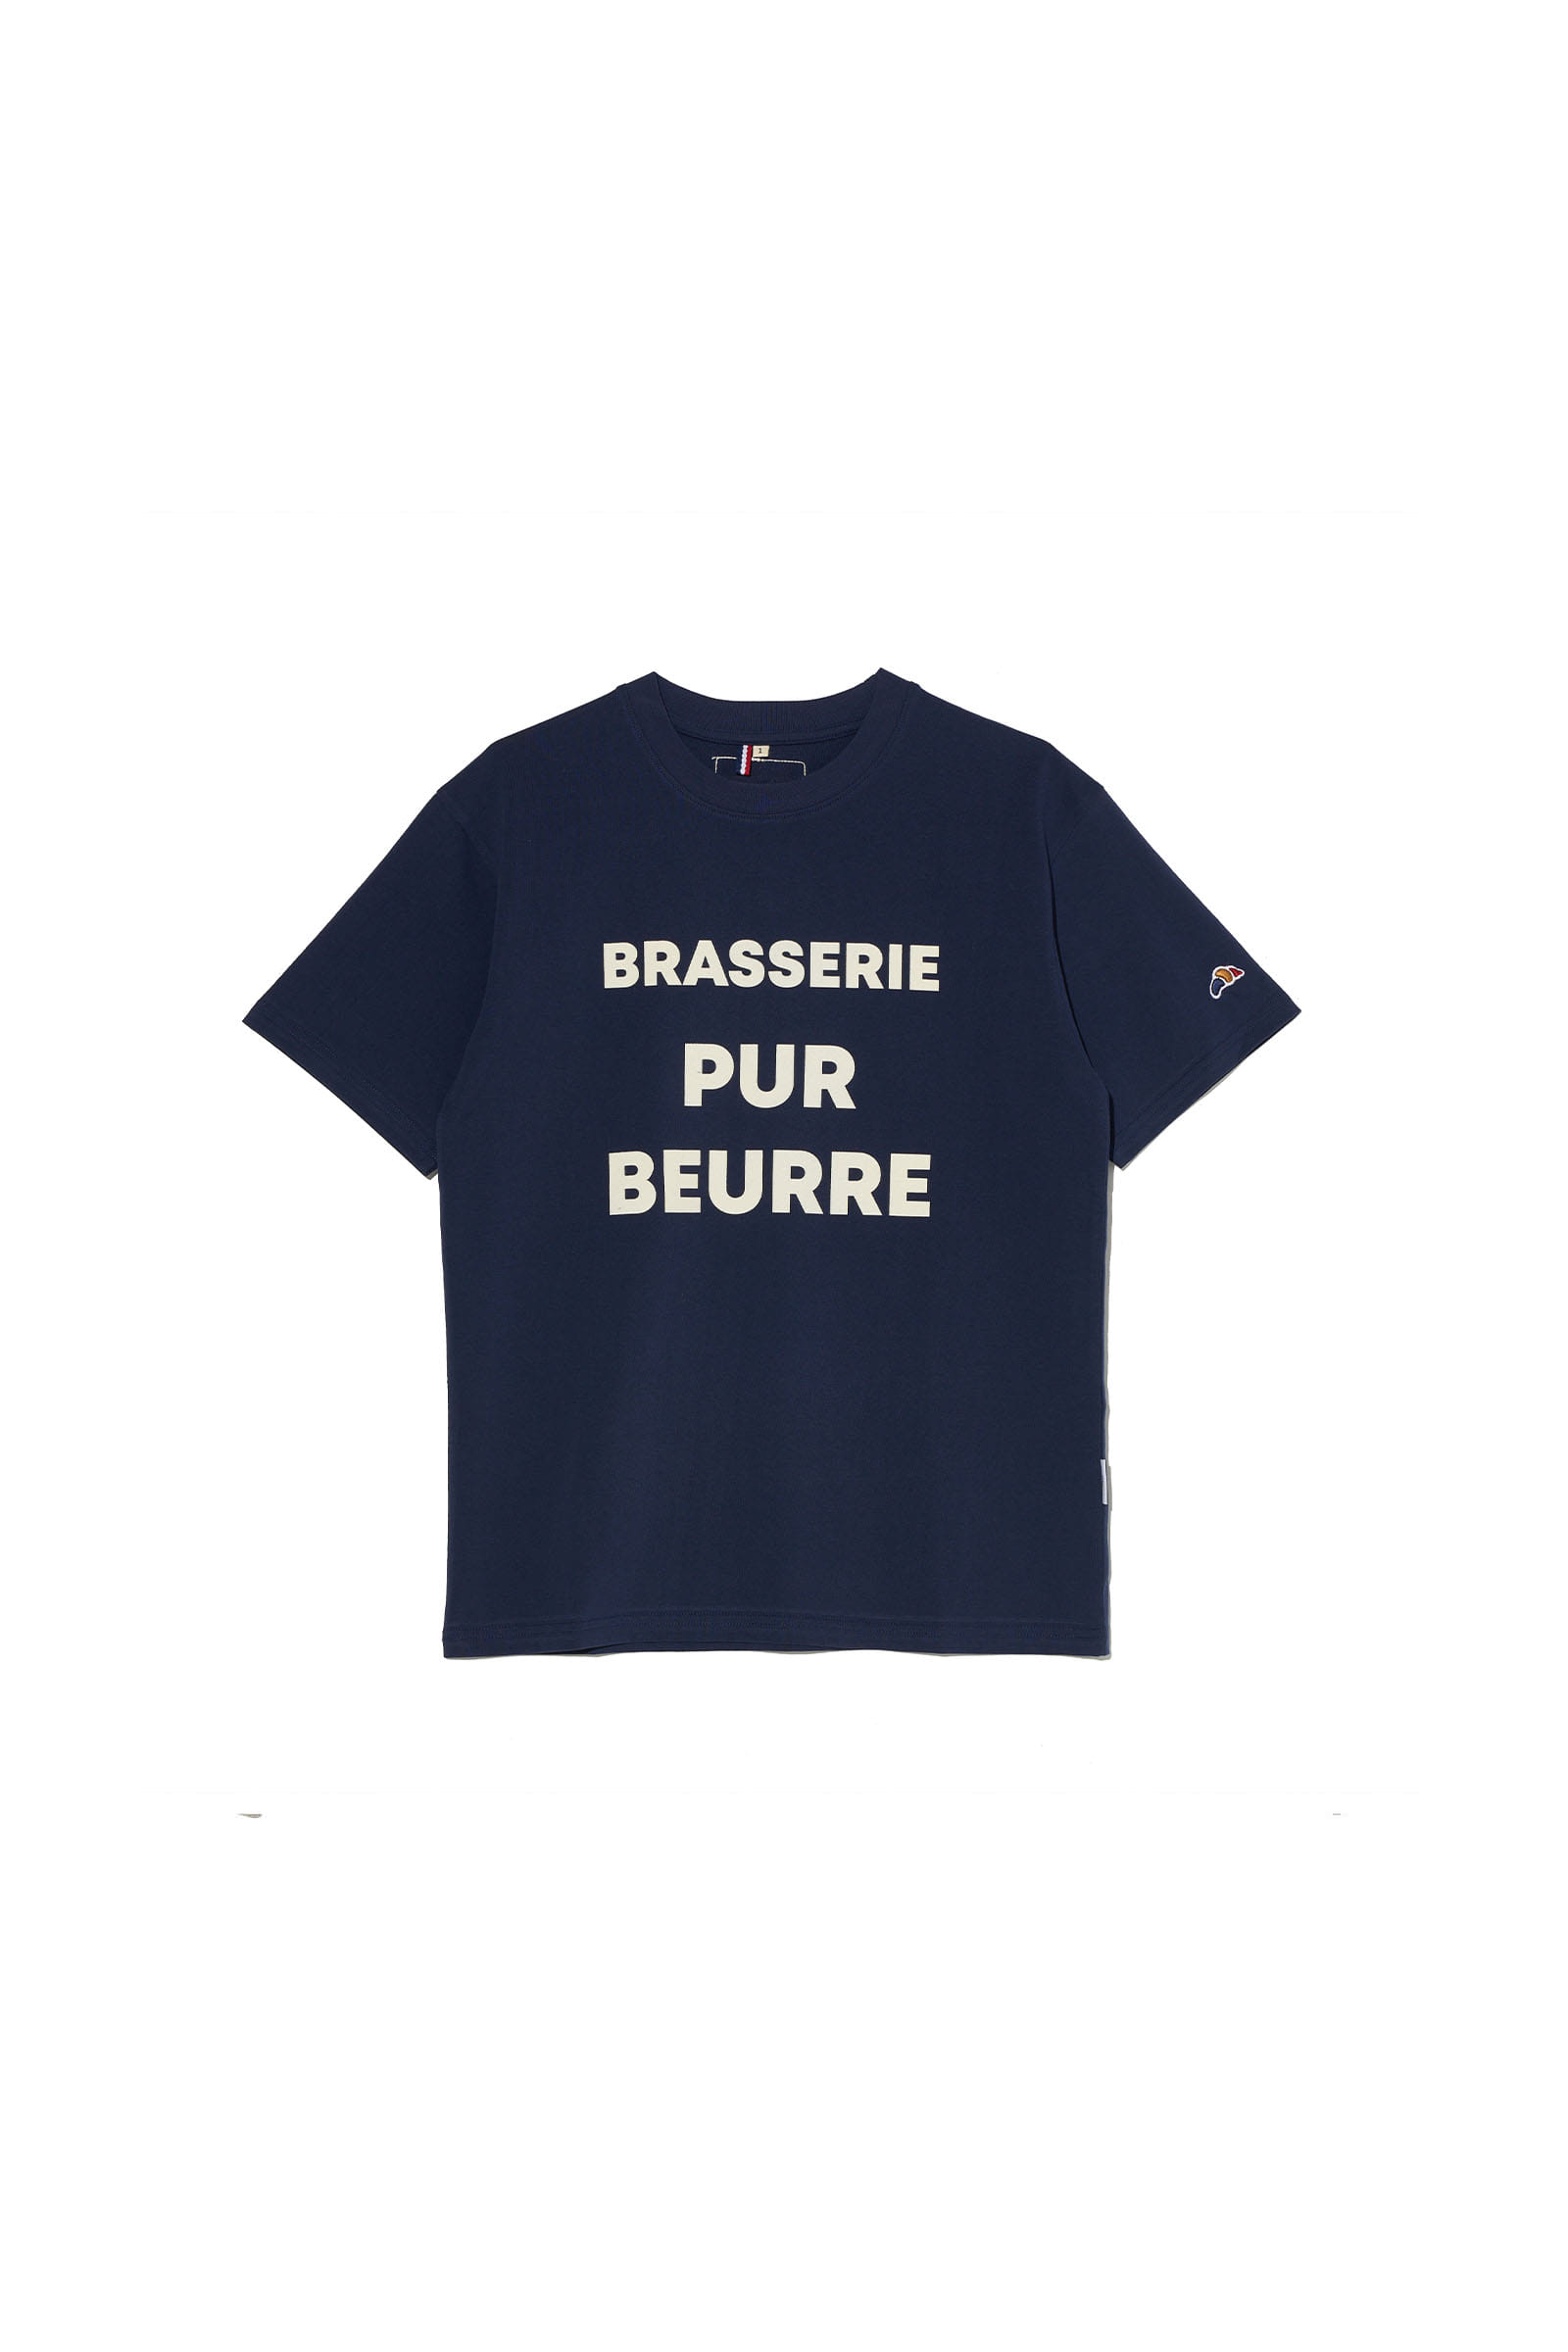 ep.6 Pur Beurre T-shirts (Navy)